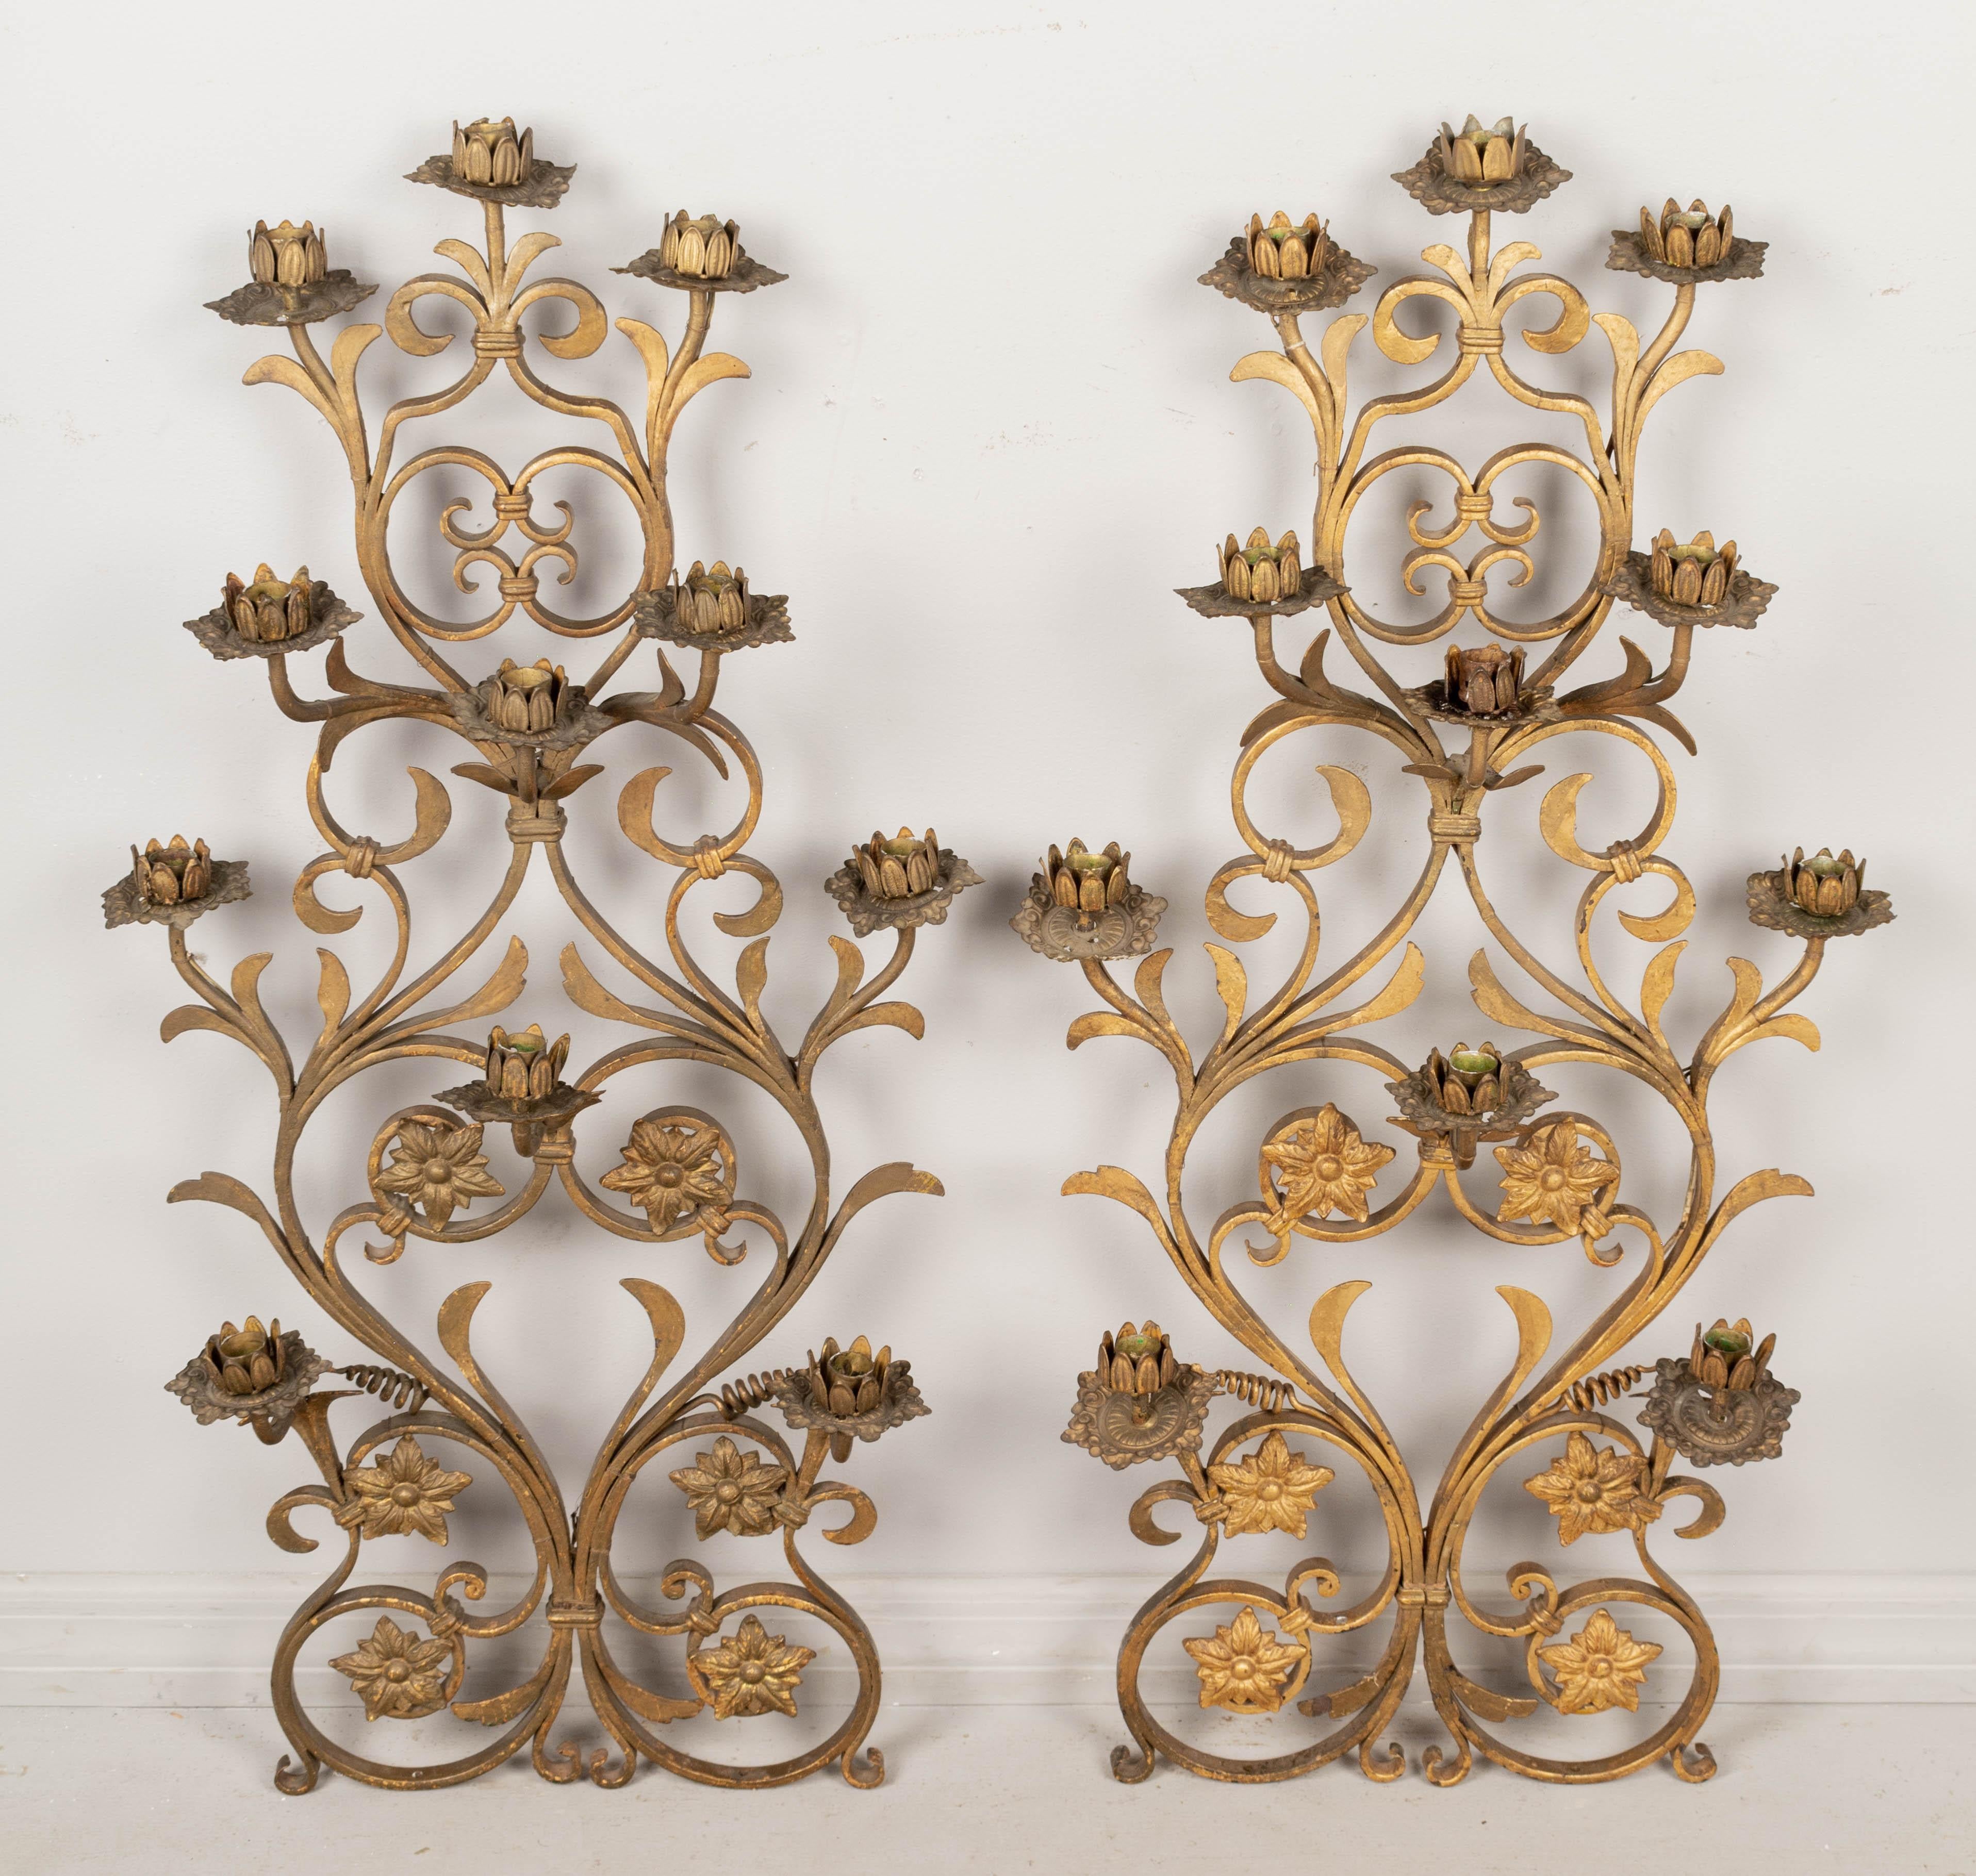 20th Century French Gilded Iron Candle Sconces For Sale